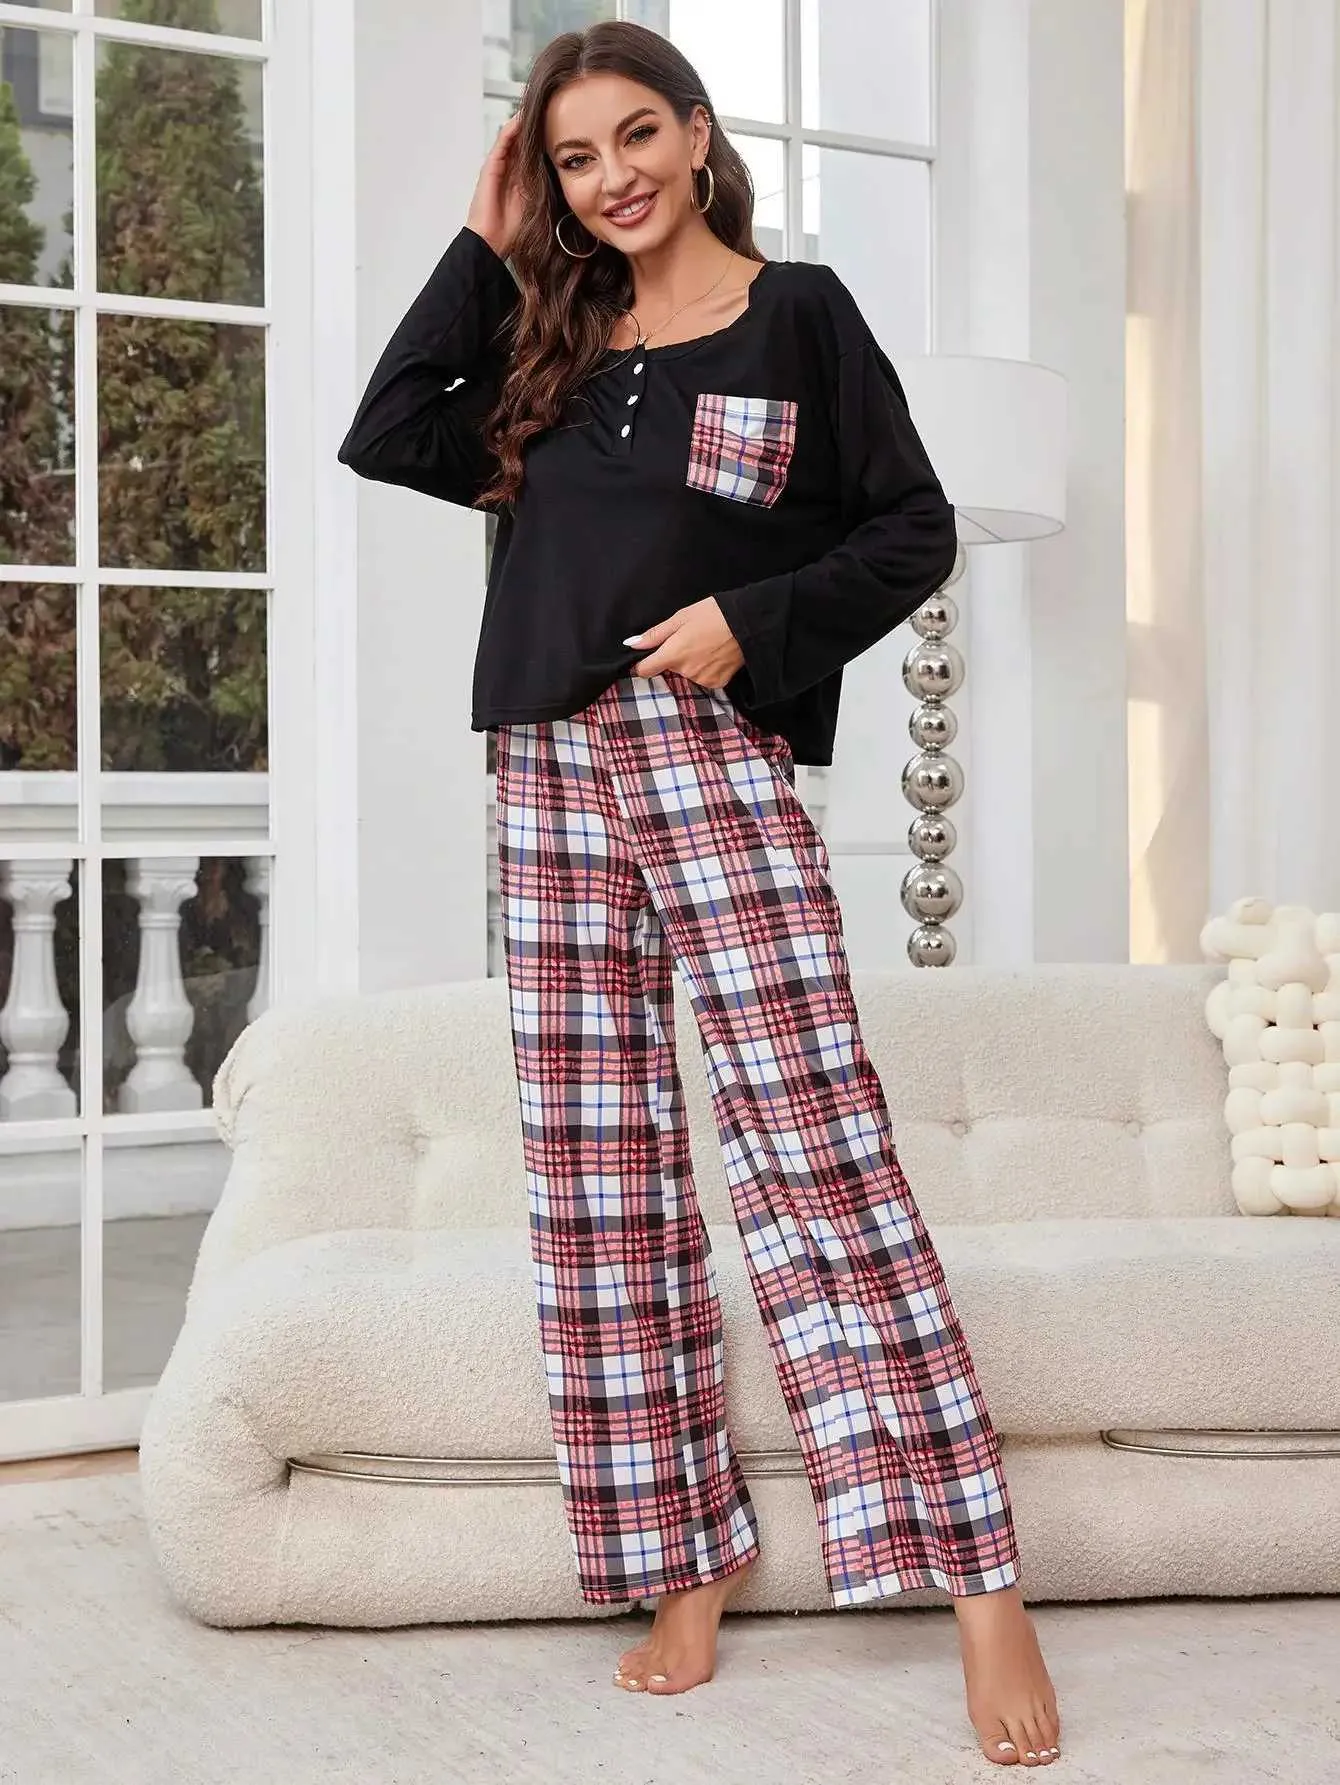 Women's Sleepwear Front Button Women Pajama Sets Long Slves Screw Neck Top Full-Length Plaid Pants Female 2 Pieces Slpwear For Spring Fall Y240426